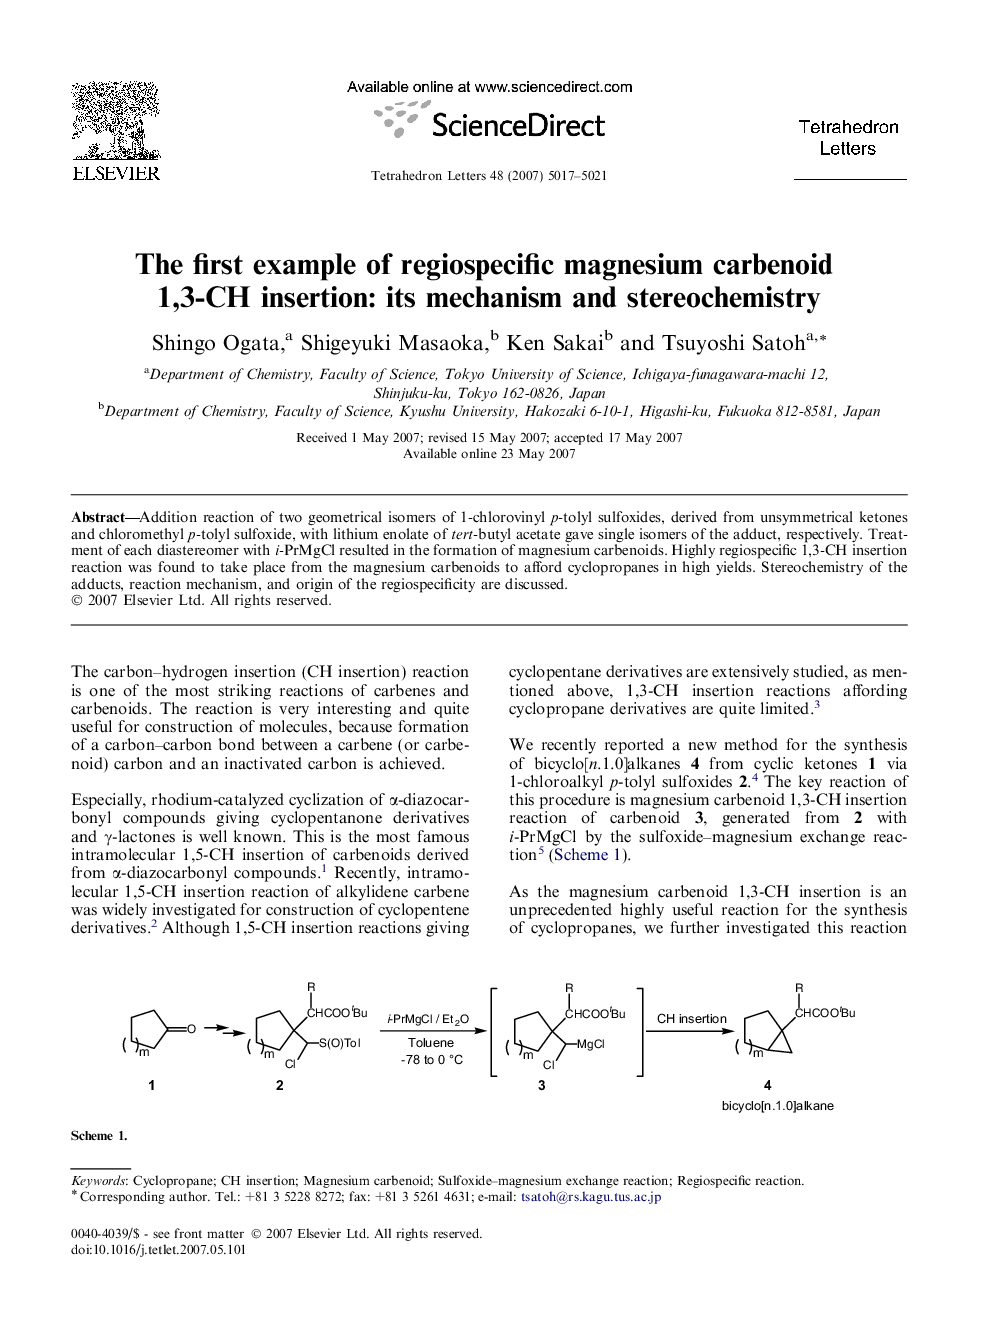 The first example of regiospecific magnesium carbenoid 1,3-CH insertion: its mechanism and stereochemistry